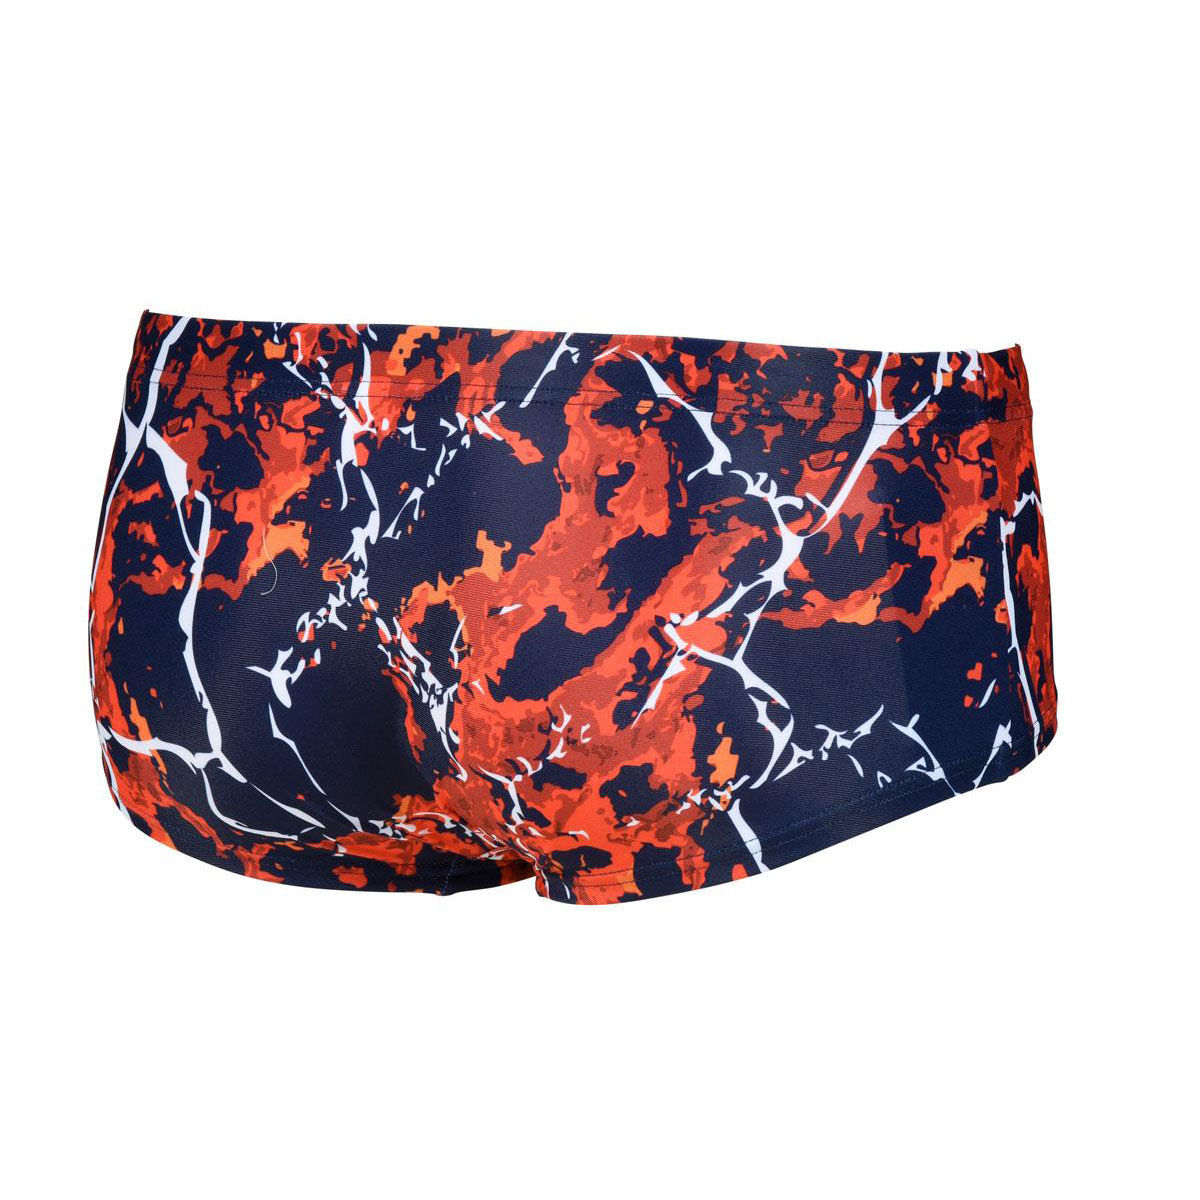 Arena Earth Texture Low Waist Short - Navy/ Red Multi